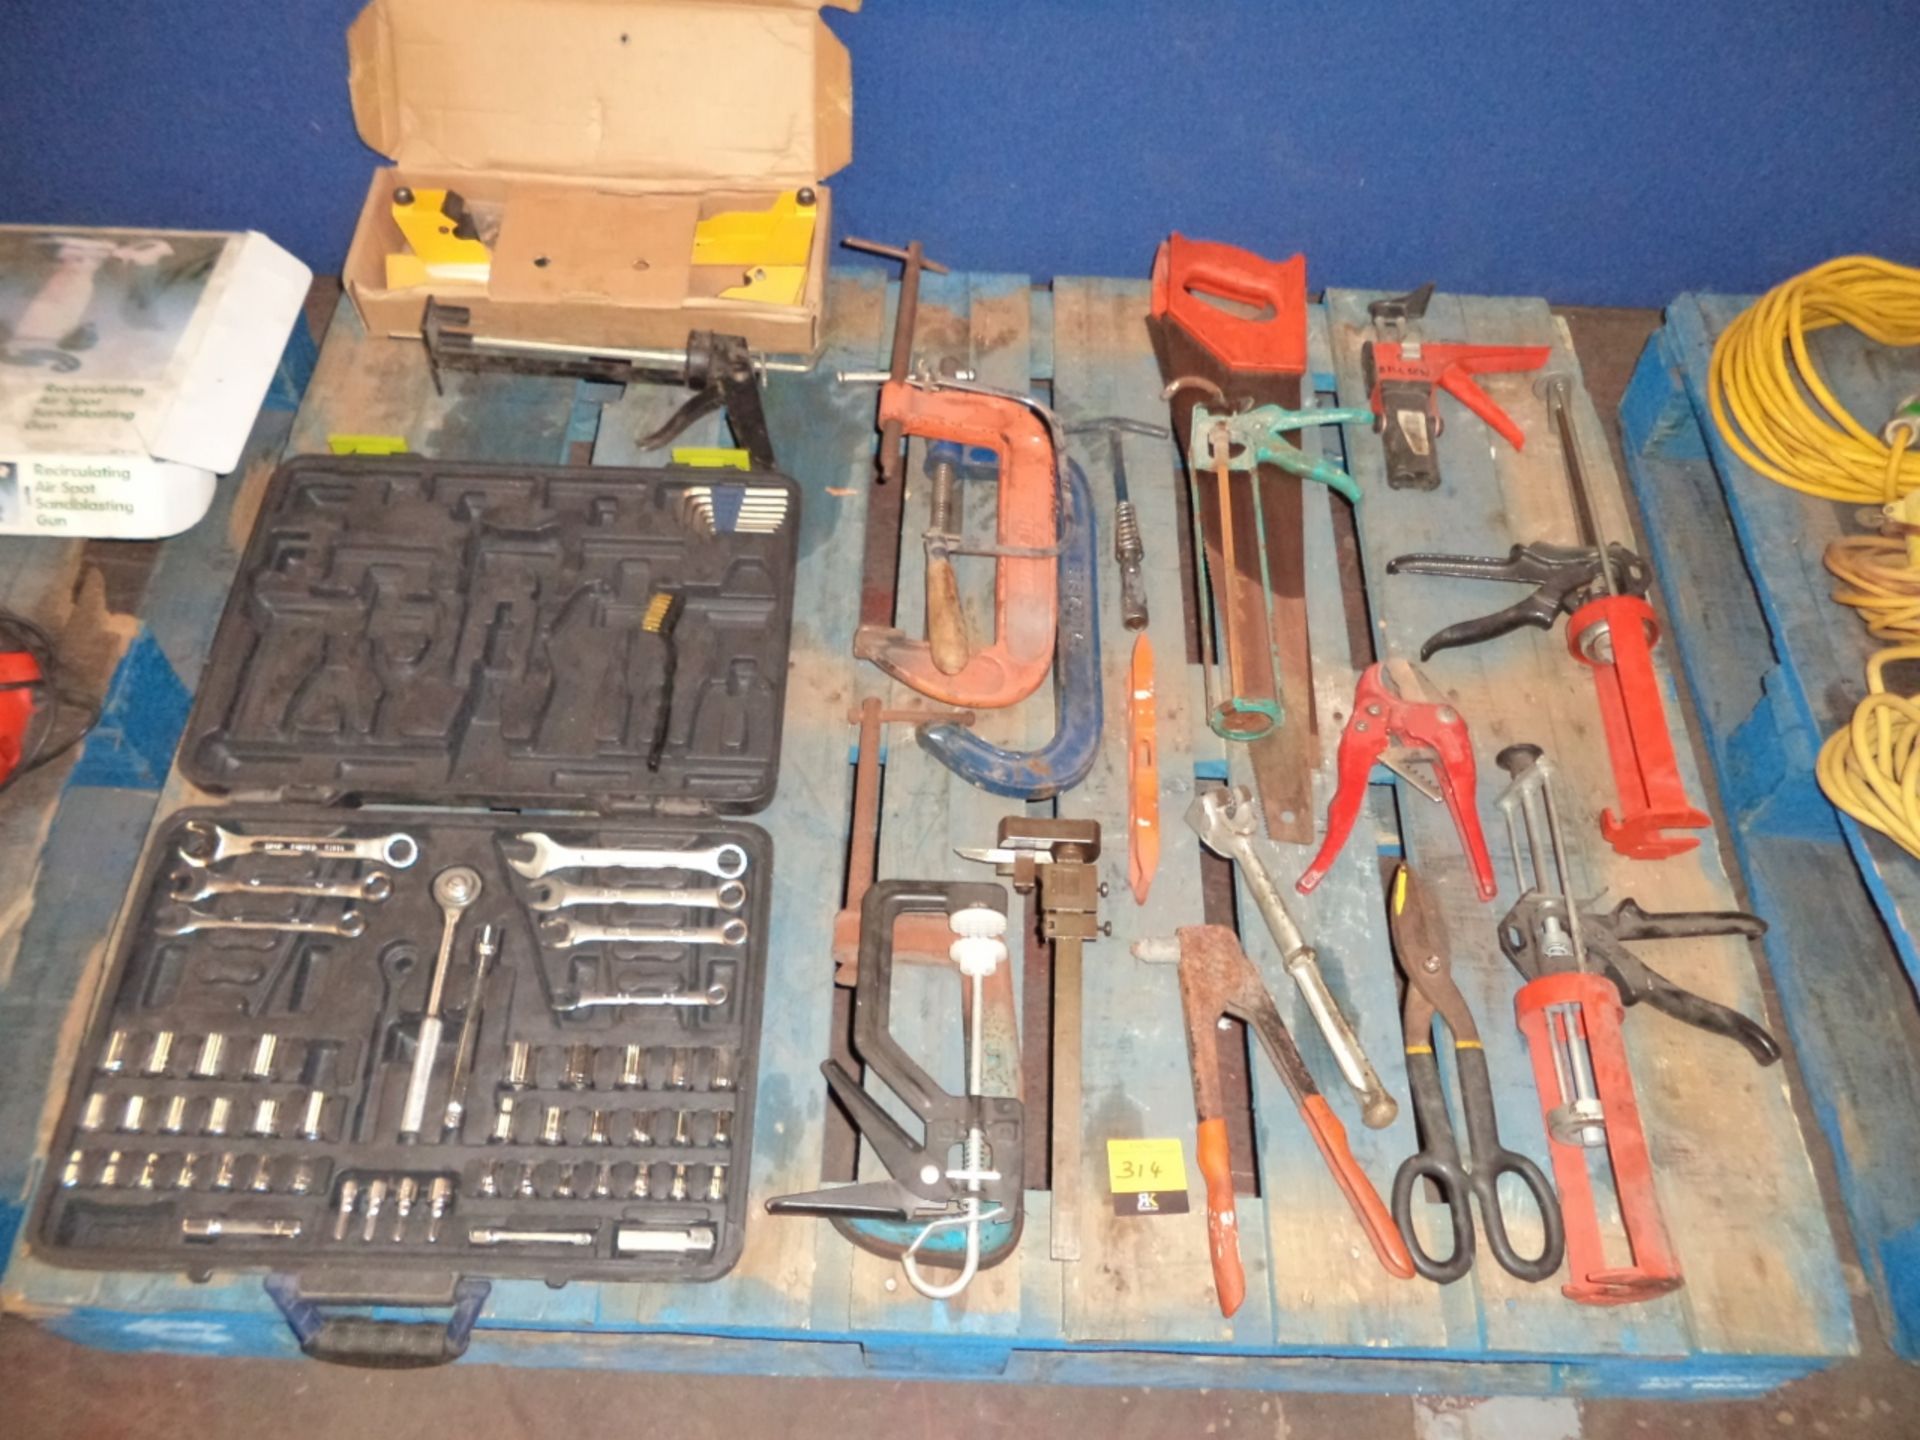 Contents of a pallet of assorted hand tools, clamps, tool kits and more